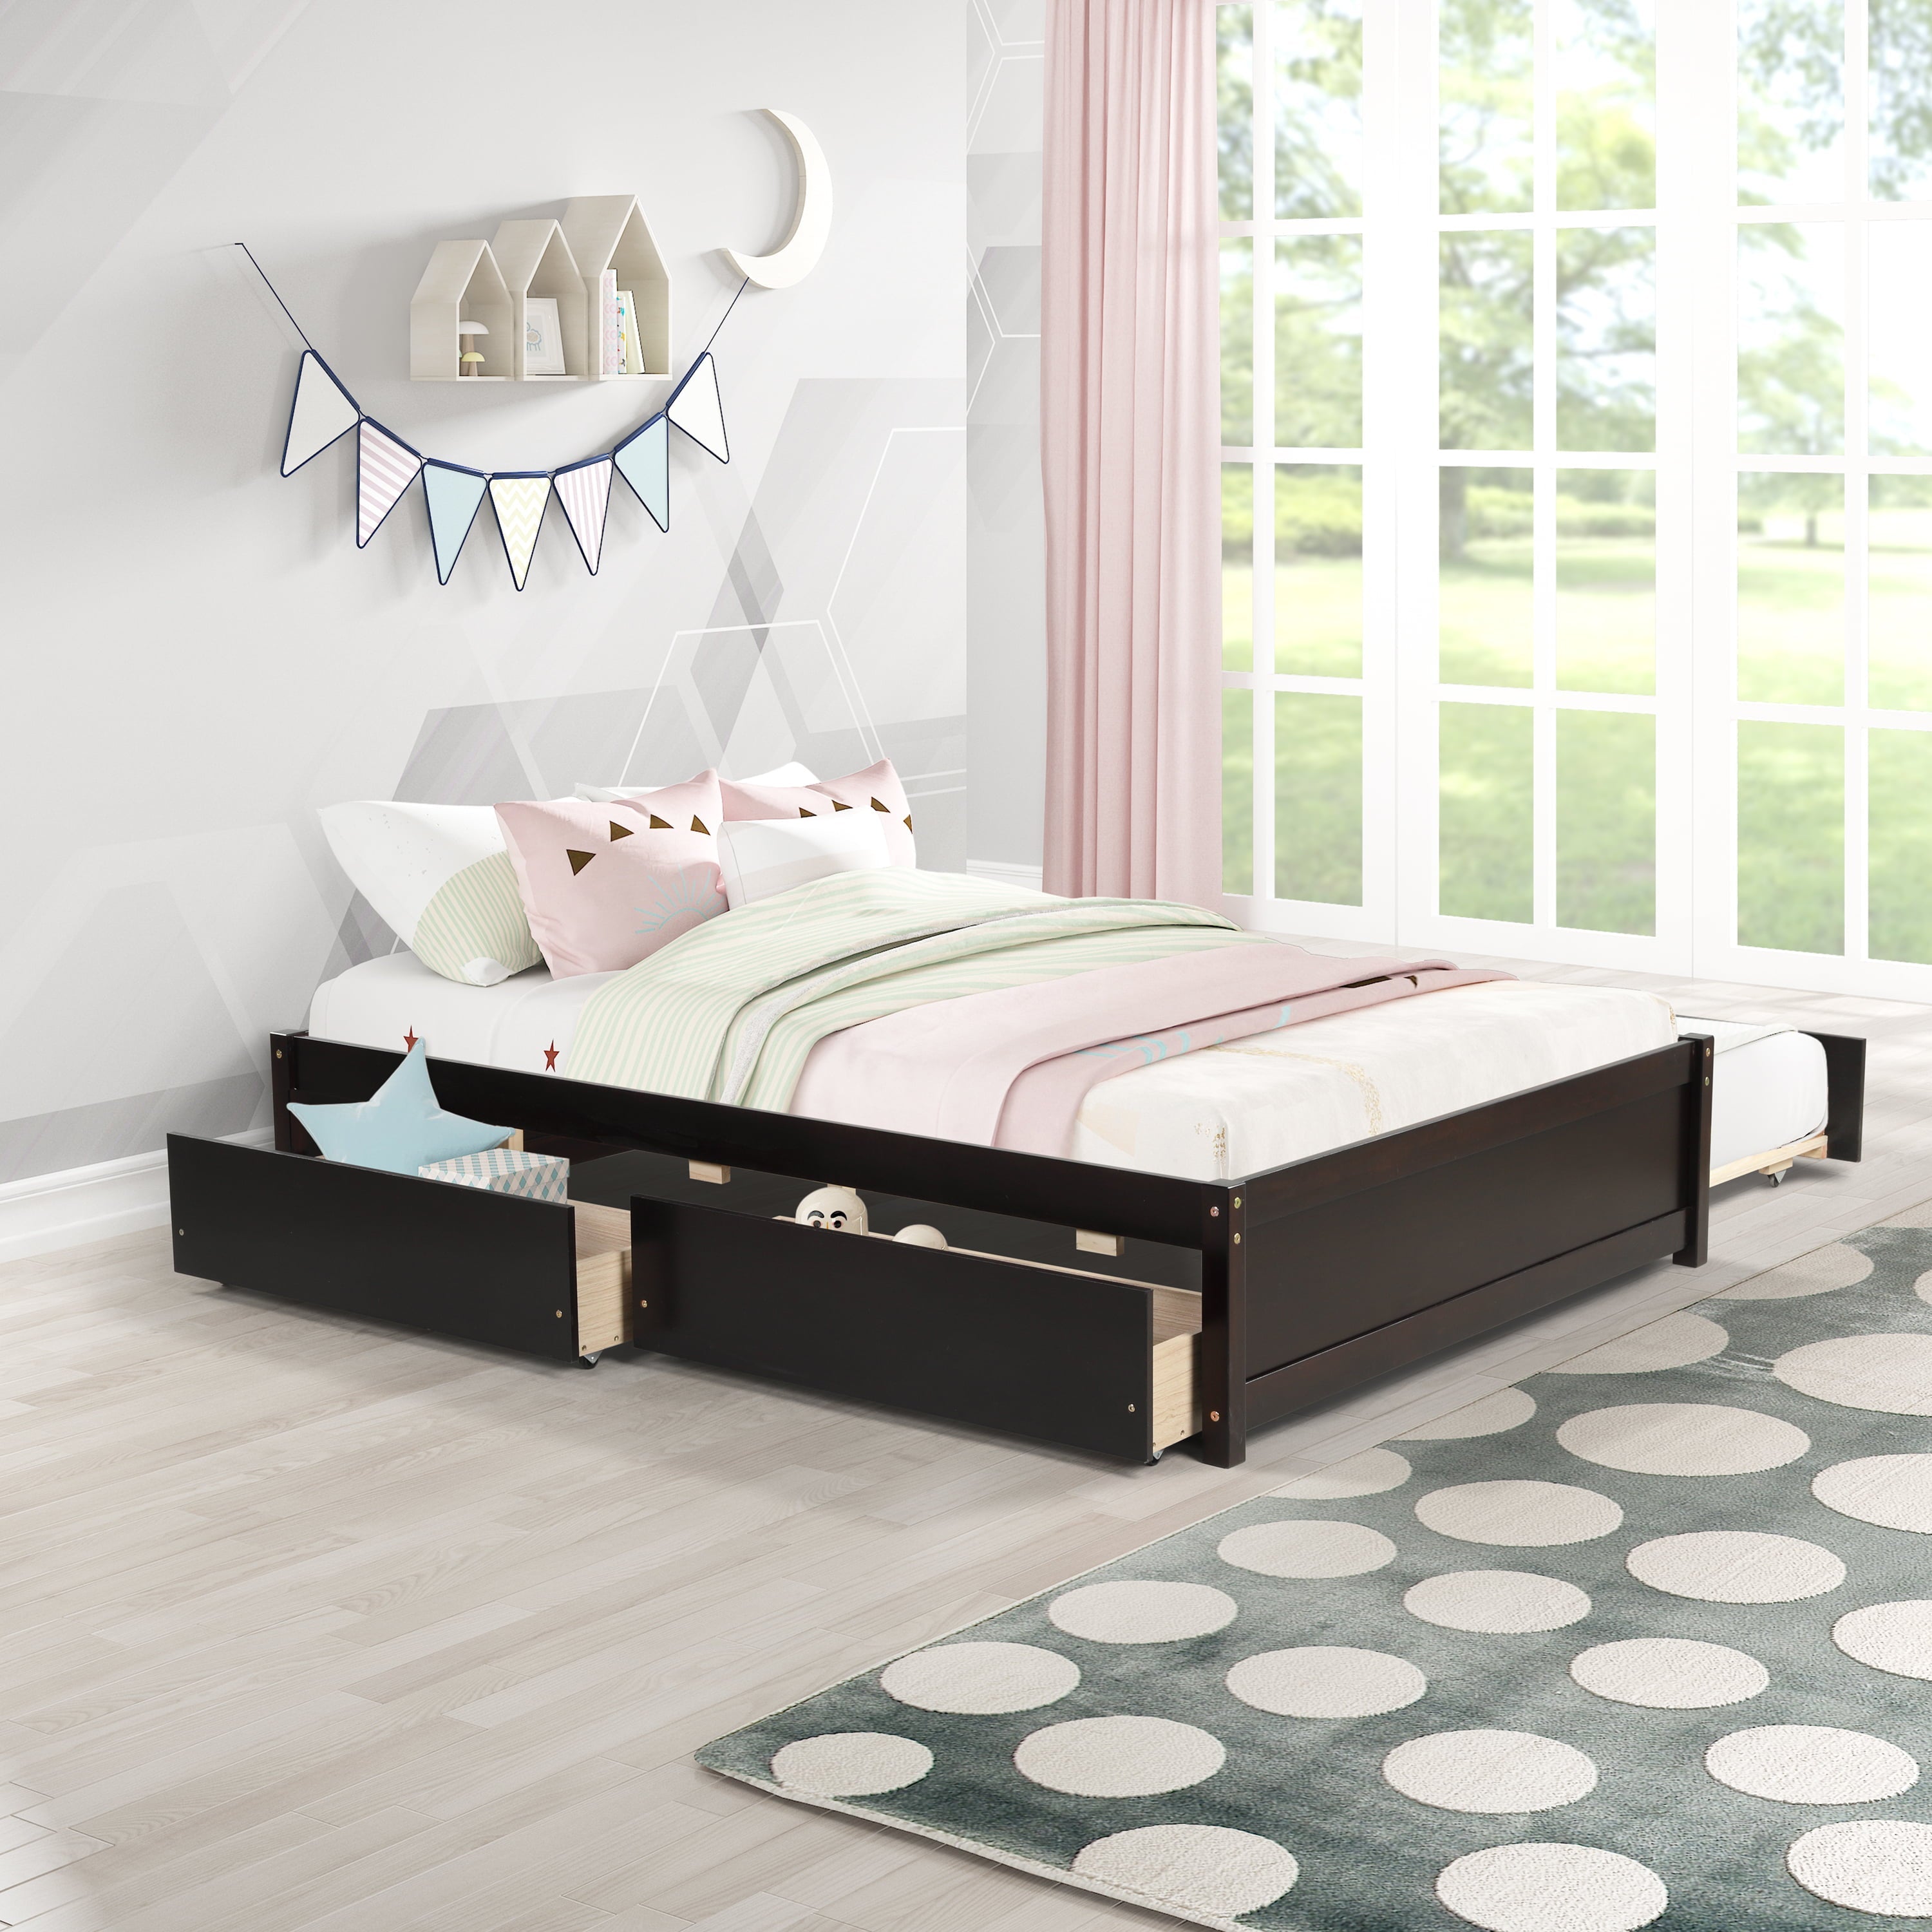 Ouyessir Full Size Platform Bed, Solid Wood Full Size Bed Frame with Twin Size Trundle Bed and 2 Storage Drawers,Storage Bed for Kids Teens Bedroom,No Spring Box Needed (Espresso)